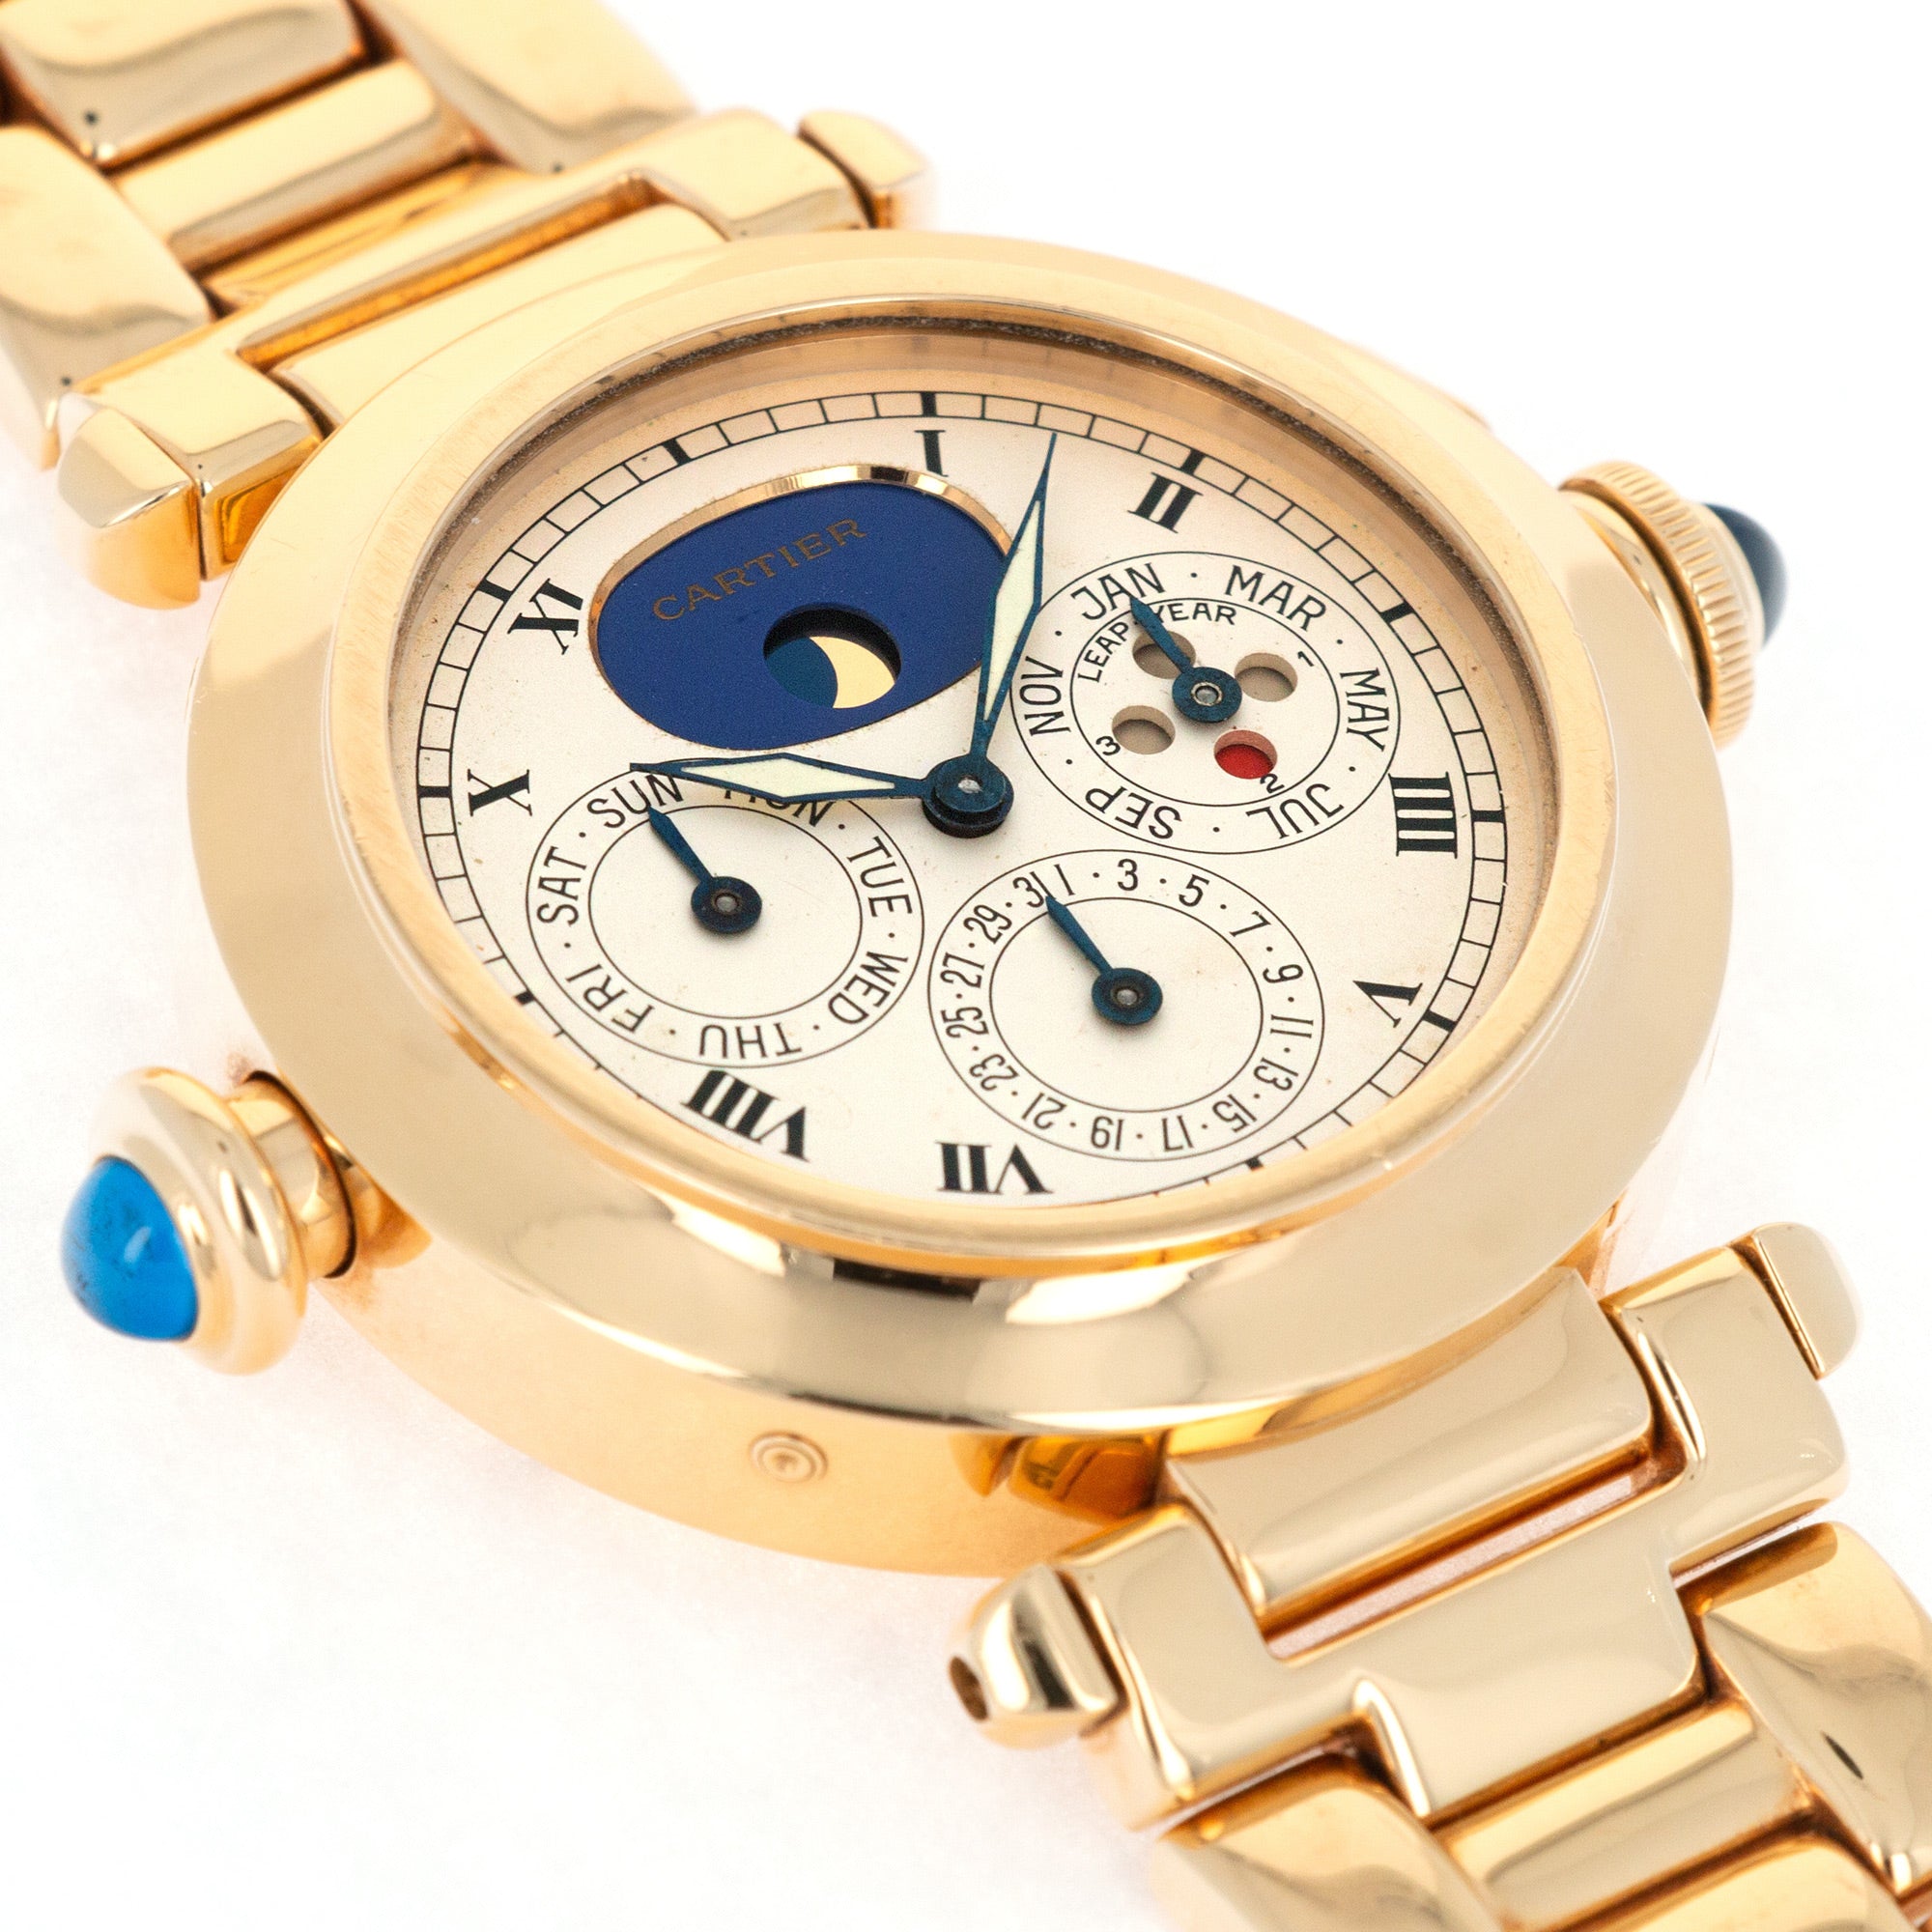 Cartier - Cartier Yellow Gold Pasha Perpetual Calendar Minute Repeater Watch - The Keystone Watches